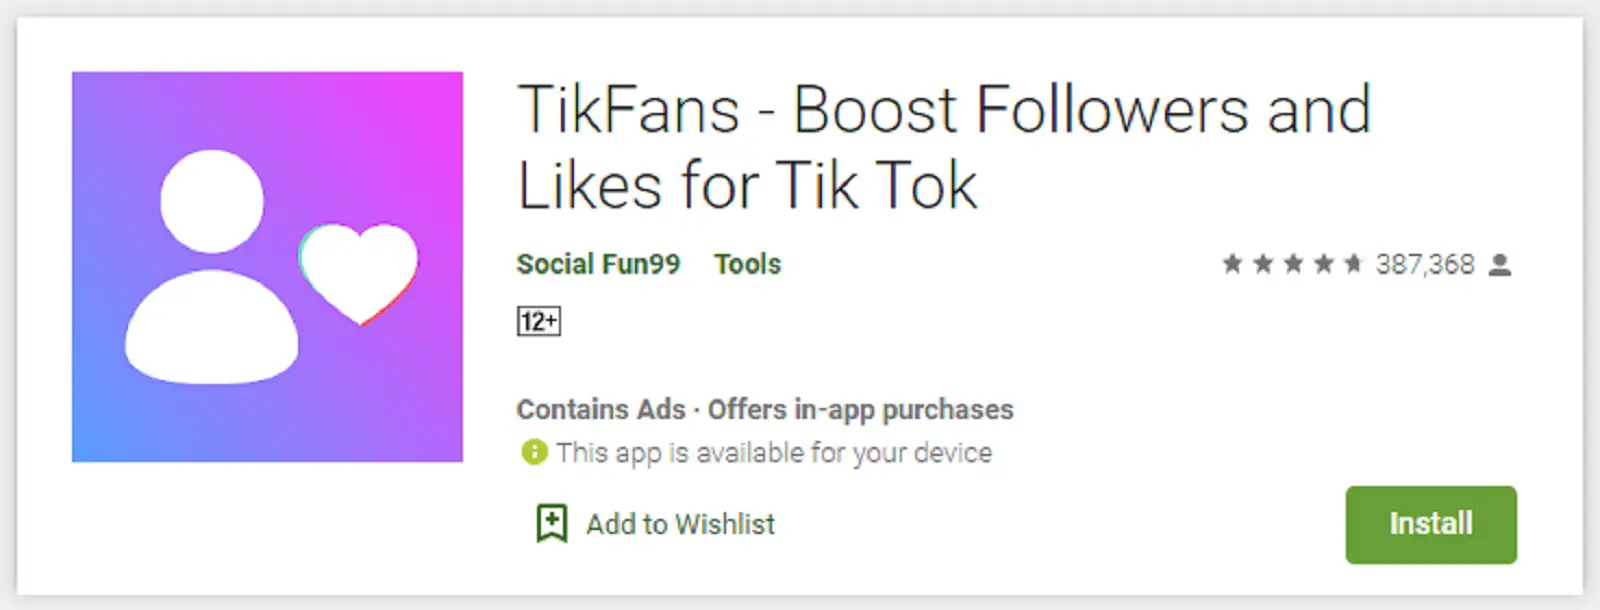 TikFans - Boost Followers and Likes for Tik Tok